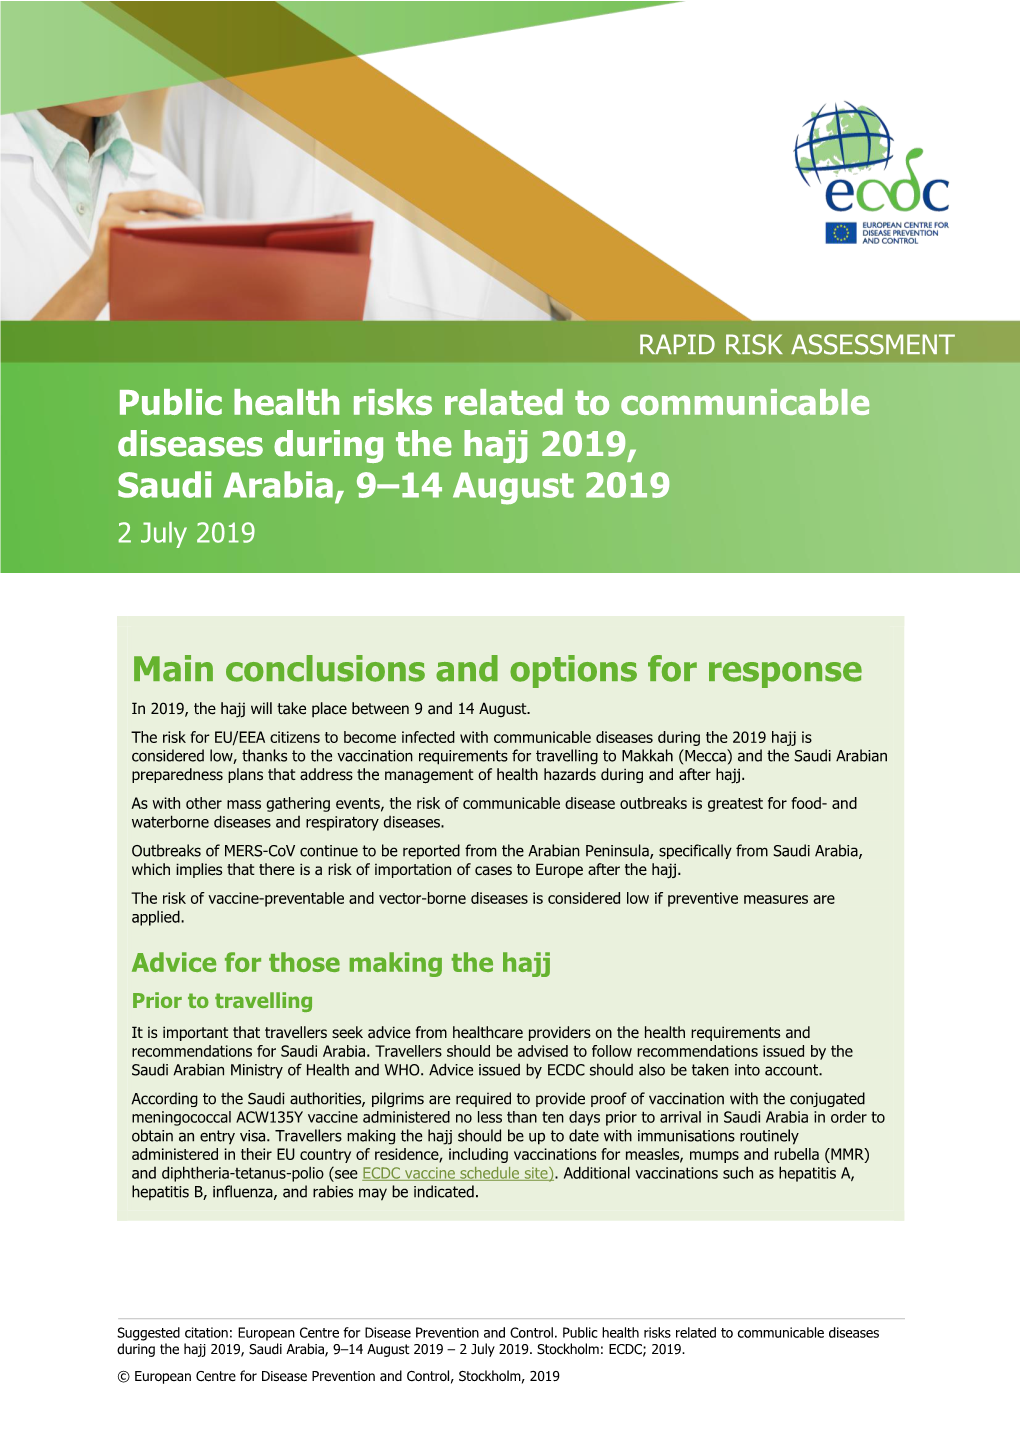 Public Health Risks Related to Communicable Diseases During the Hajj 2019, Saudi Arabia, 9–14 August 2019 2 July 2019